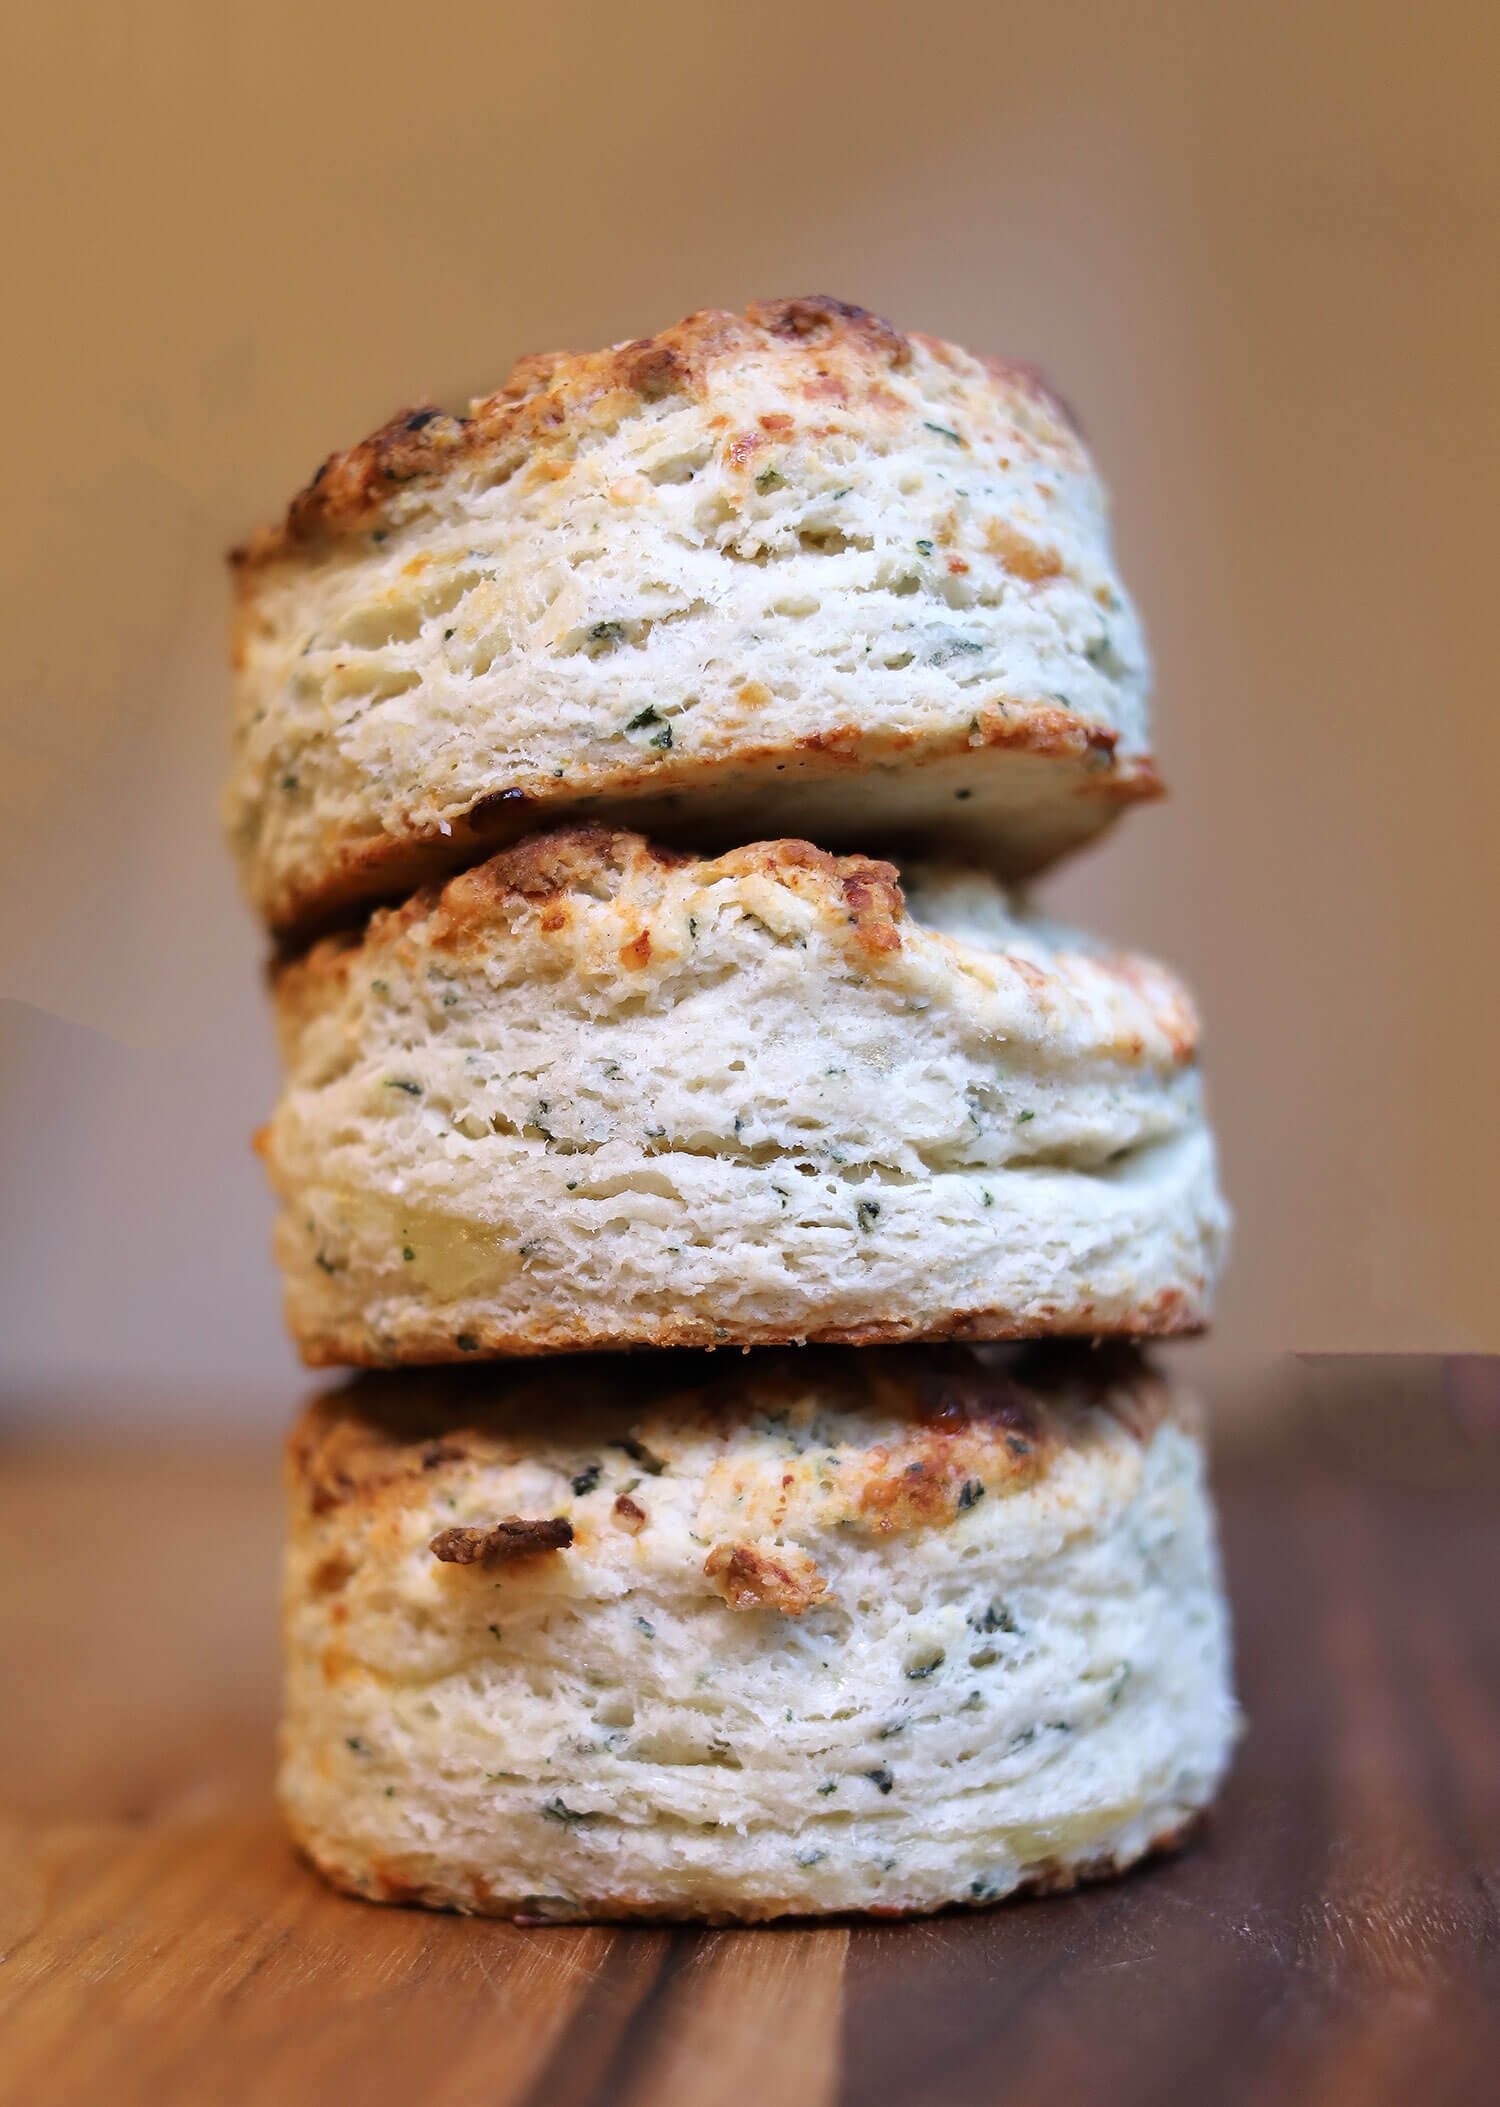 PARMESAN BRIE AND SAGE BISCUITS